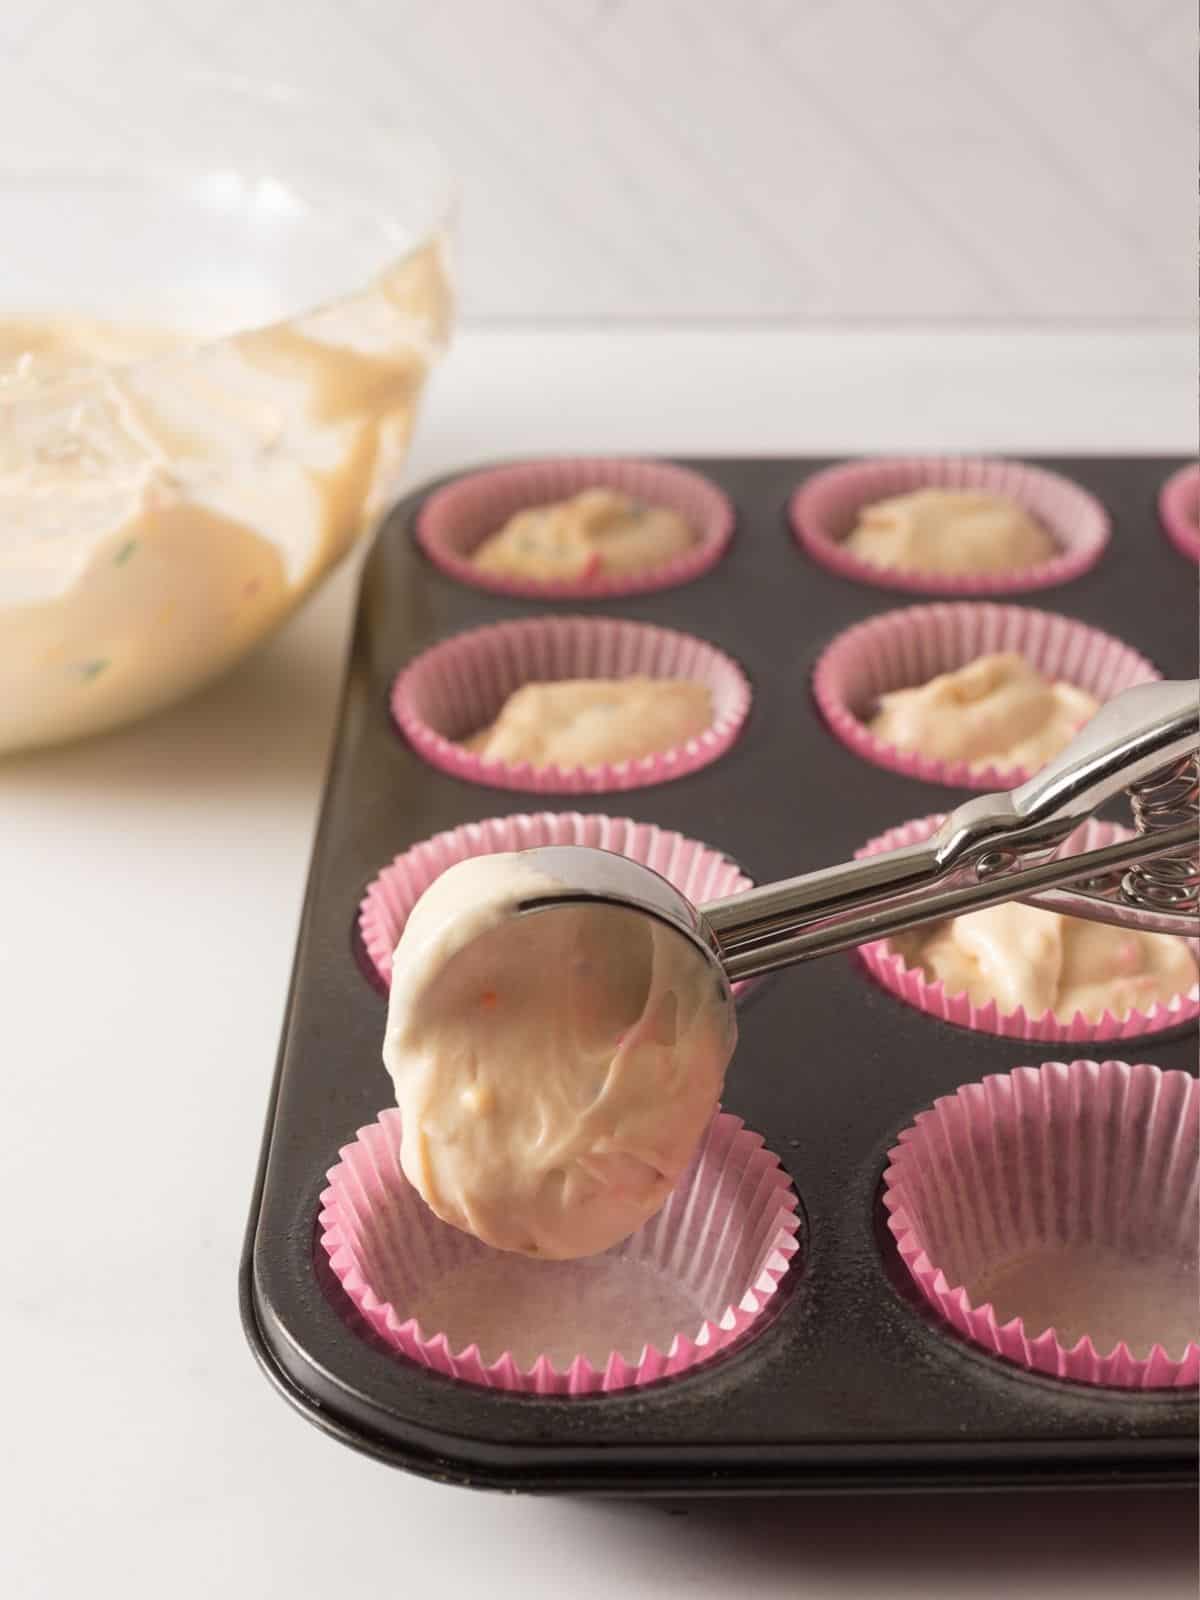 use ice cream scoop to add batter to muffin pan.